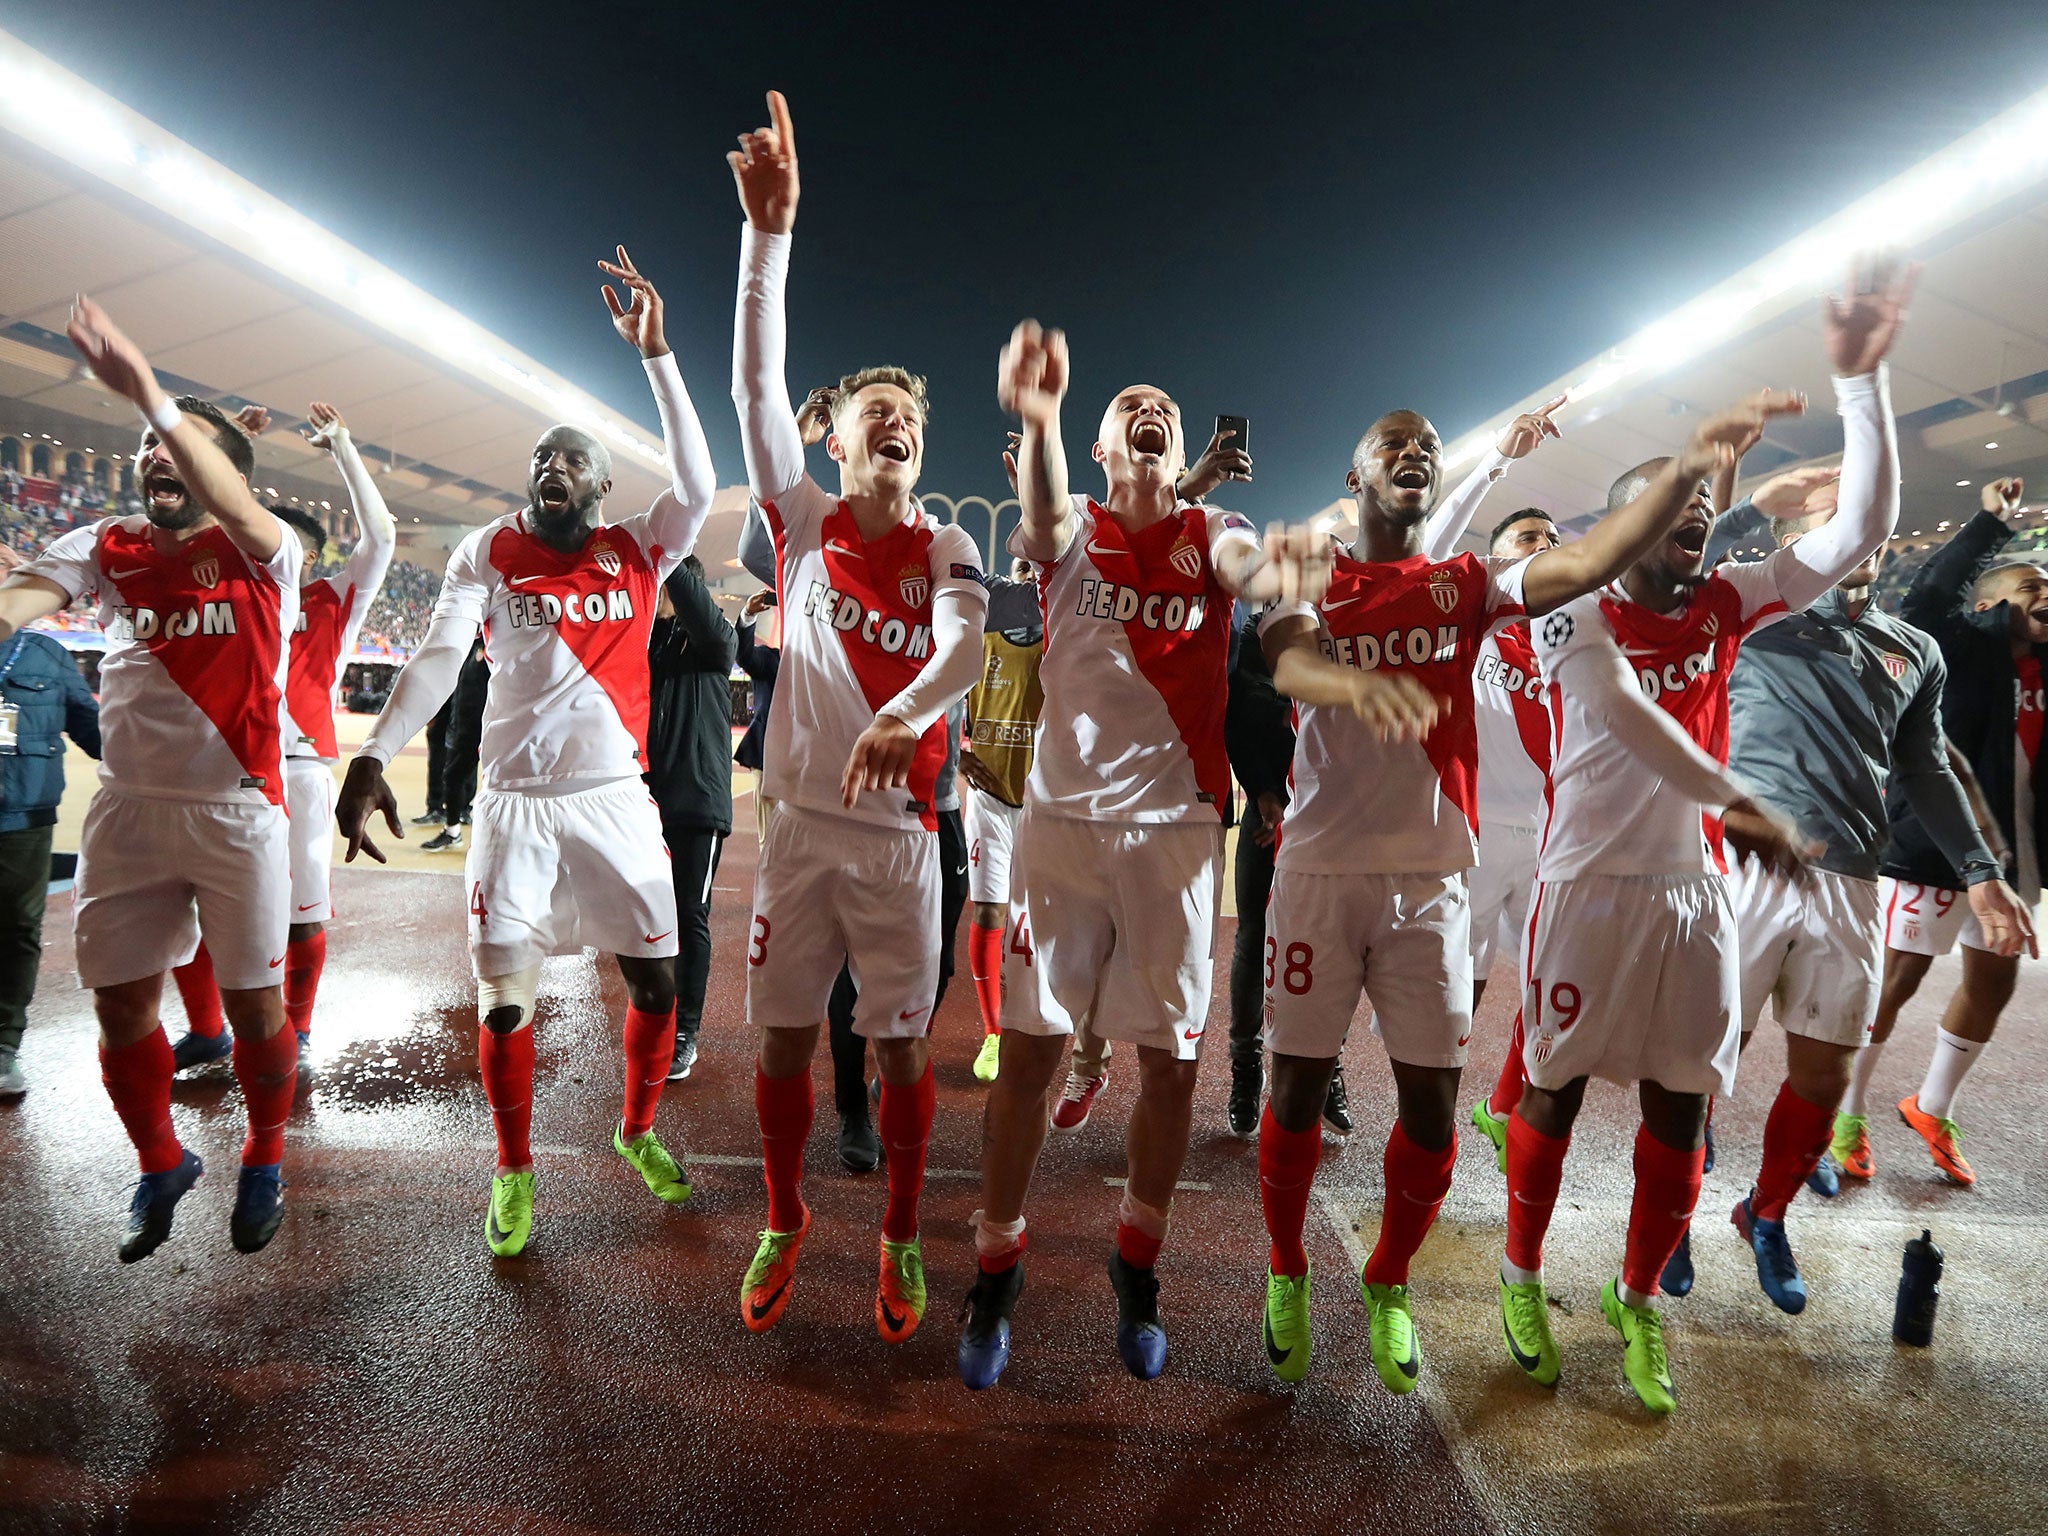 Monaco were crowned Champions of France at the end of last season